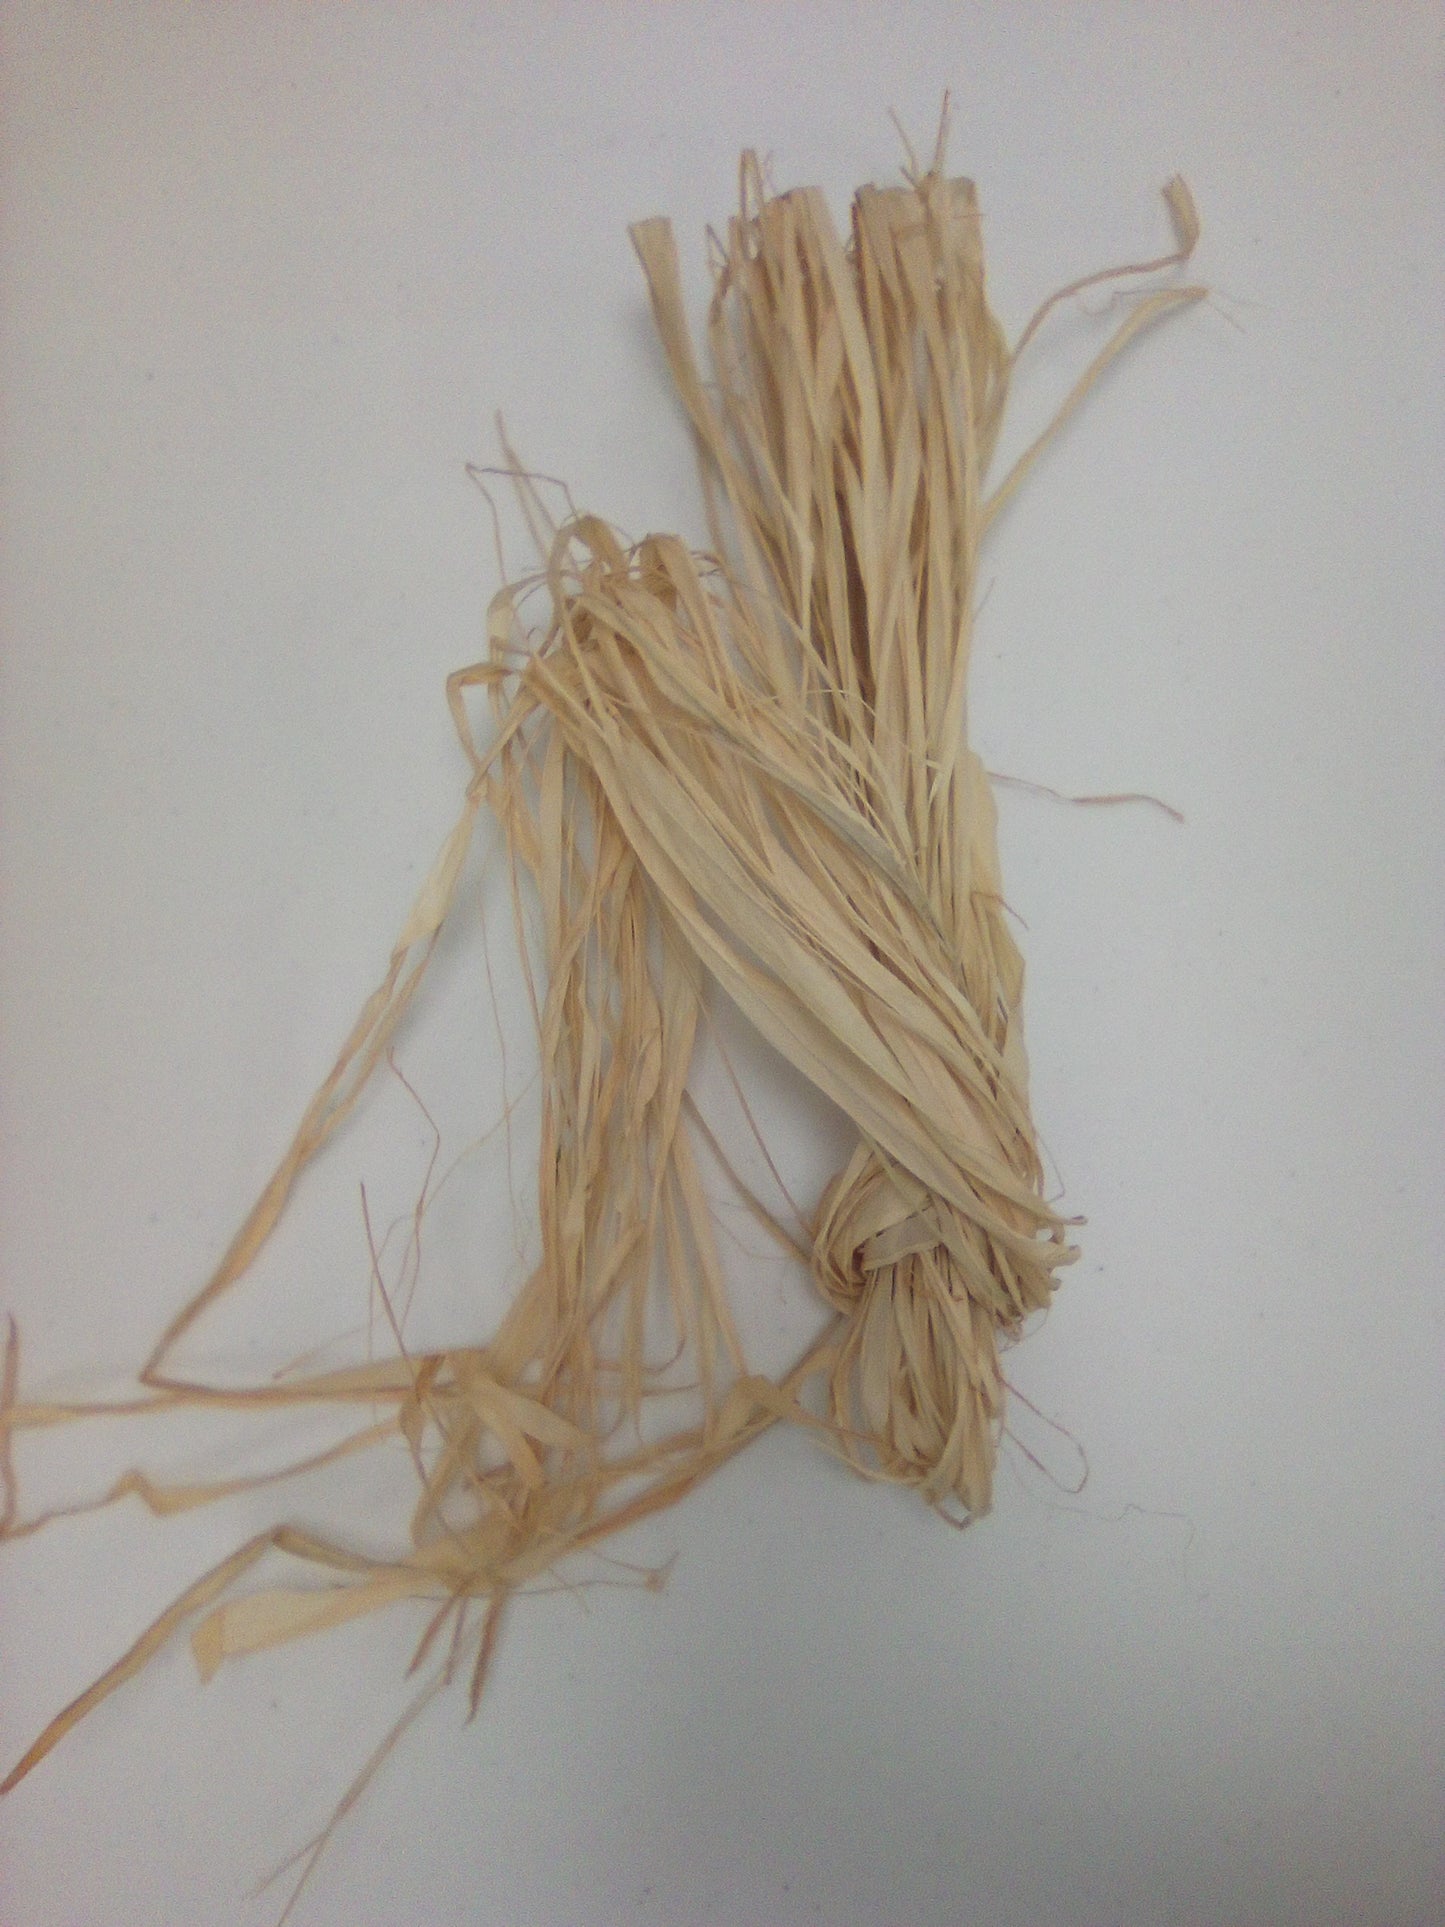 Kosher L'Mehadrin bamboo string for schach